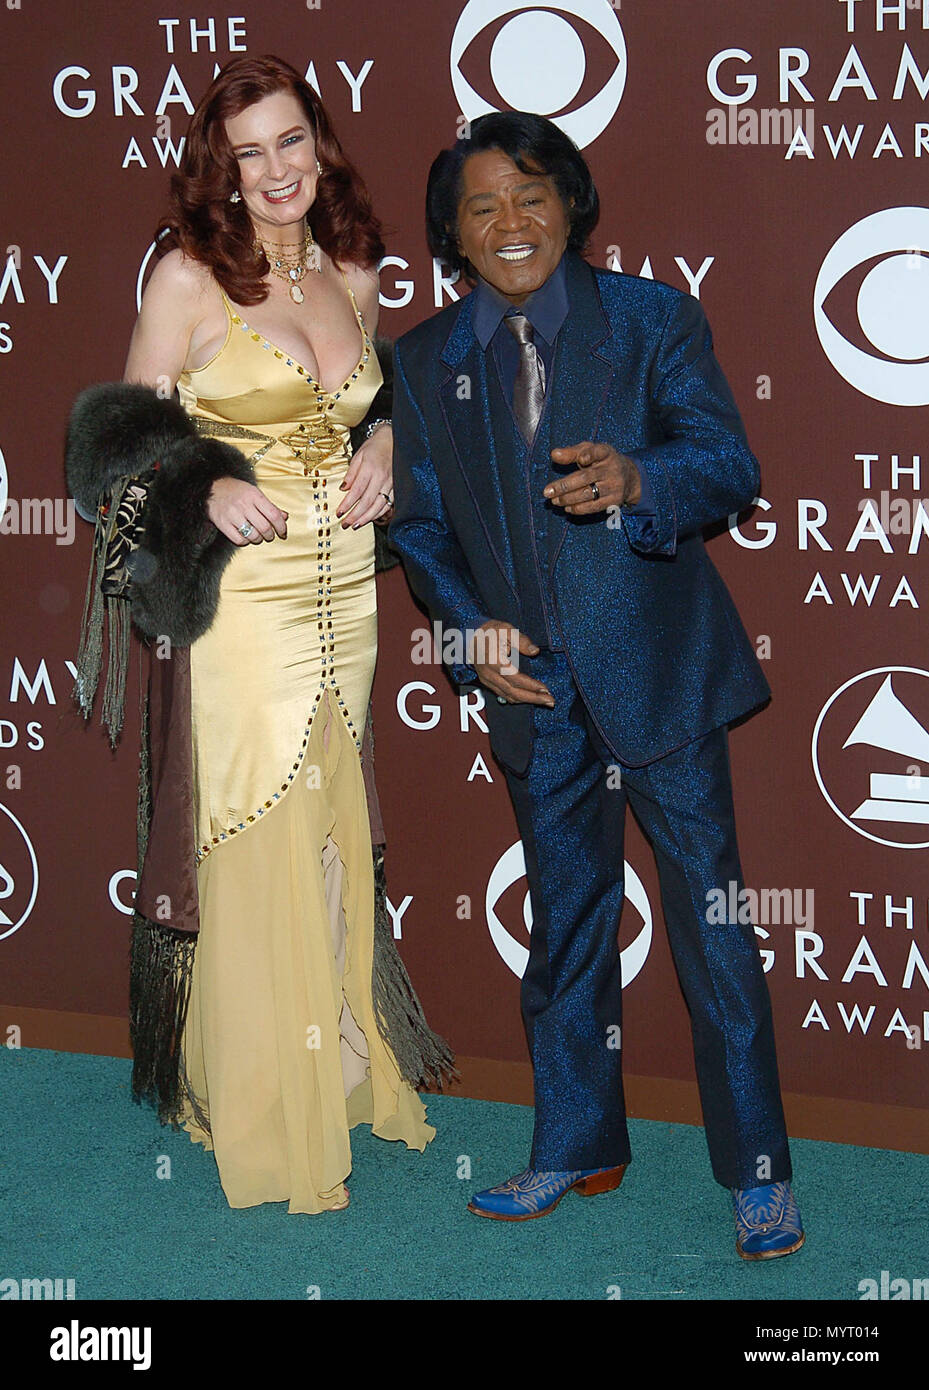 James Brown arriving at the 47th Annual Grammy Awards at the Staples Center in Los Angeles. February 13, 2005.BrownJames 53  Event in Hollywood Life - California, Red Carpet Event, USA, Film Industry, Celebrities, Photography, Bestof, Arts Culture and Entertainment, Celebrities fashion, Best of, Hollywood Life, Event in Hollywood Life - California, Red Carpet and backstage, Music celebrities, Topix, Couple, family ( husband and wife ) and kids- Children, brothers and sisters inquiry tsuni@Gamma-USA.com, Credit Tsuni / USA, 2006 to 2009 Stock Photo